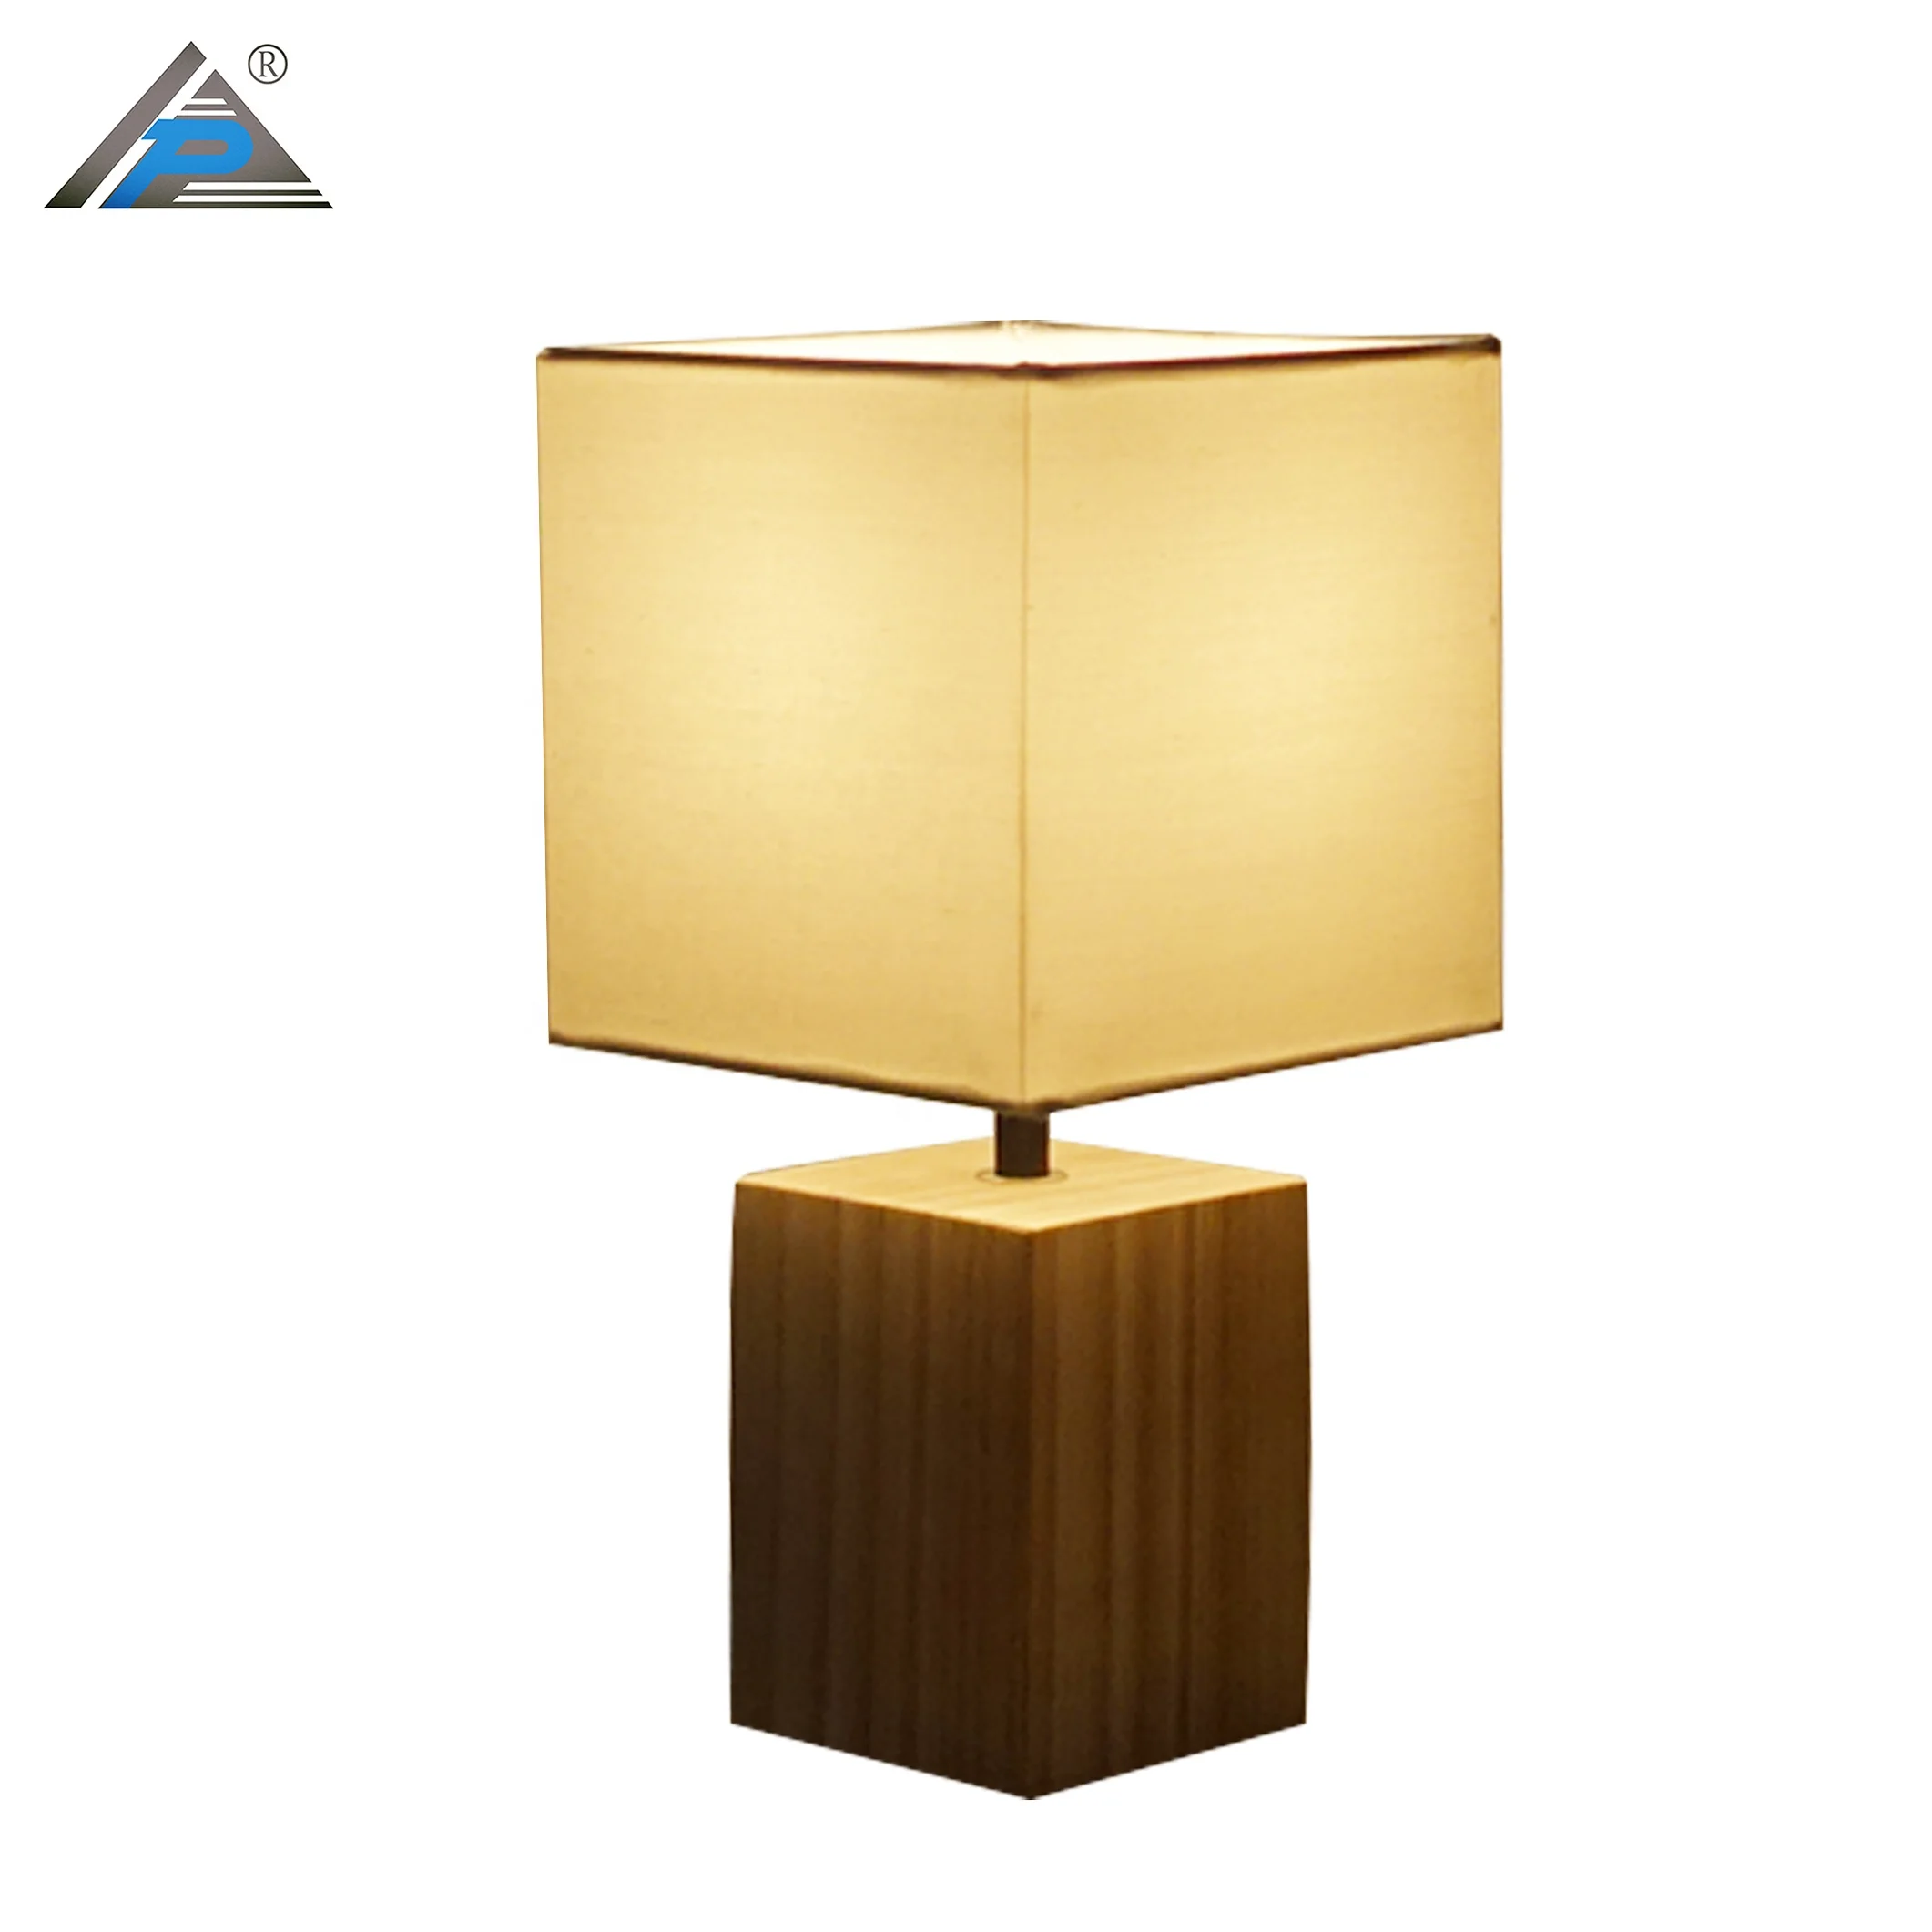 Modern Square Fabric Lampshade Table Lamp with Pine Wood Base for Home Decor Bedside Hotels and Restaurant